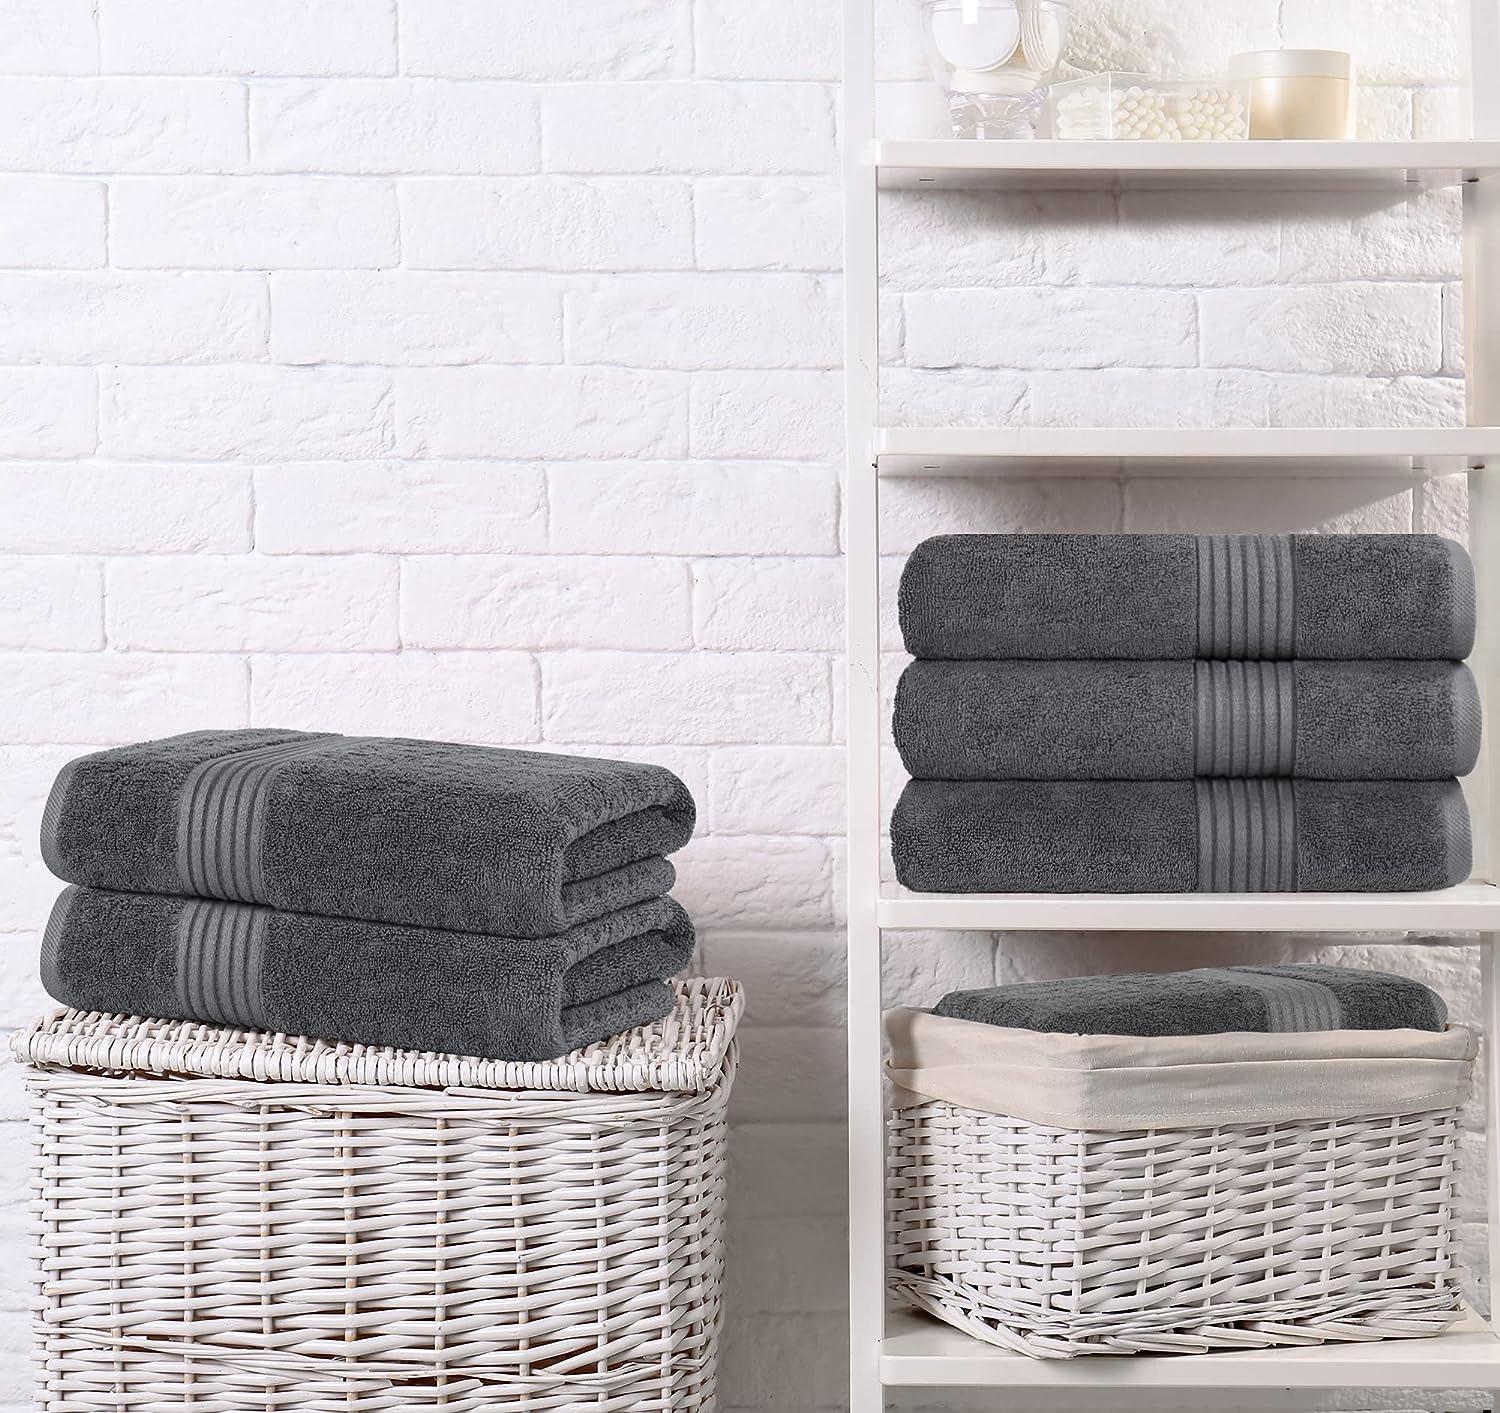 Utopia Towels 4 Pack Premium Bath Towels Set, (27 x 54 Inches) 100% Ring  Spun cotton 600gSM, Lightweight and Highly Absorbent Qu